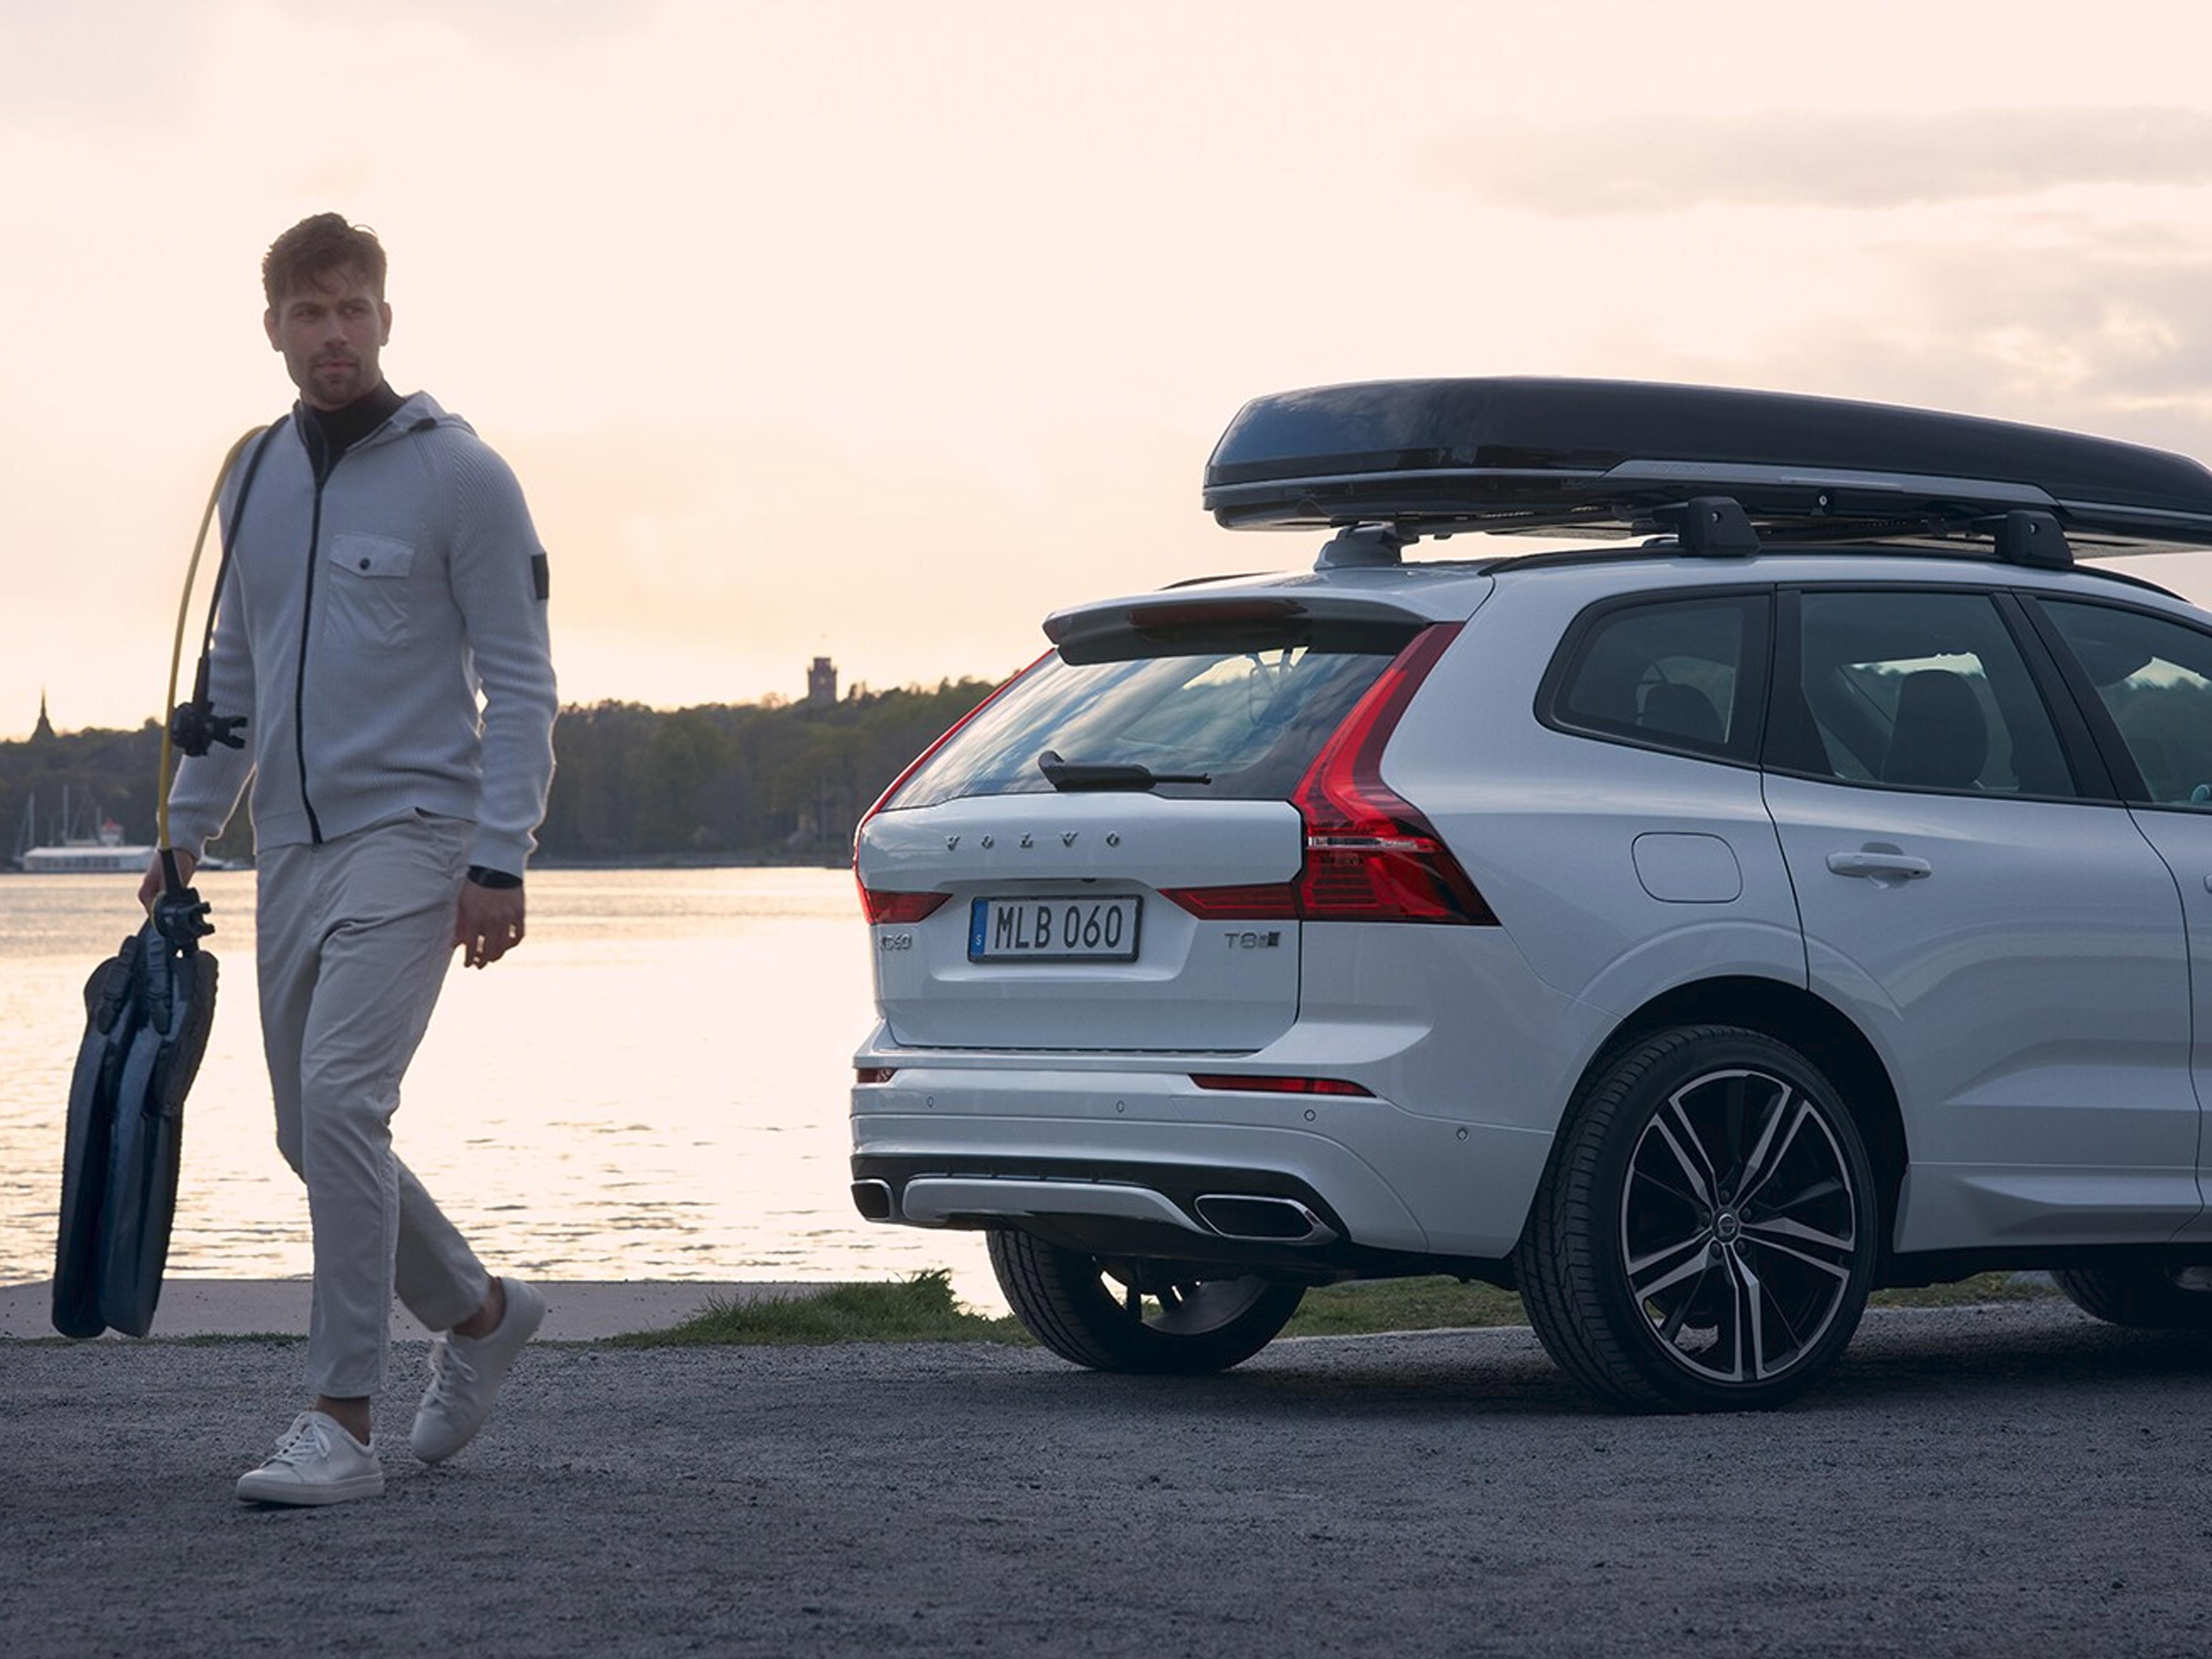 https://www.volvocars.com/images/v/-/media/market-assets/switzerland/applications/local-pages/zubehoer-und-lifestyle/dachbox_callouts_3-images_4096x3072.jpg?h=3072&iar=0&w=4096